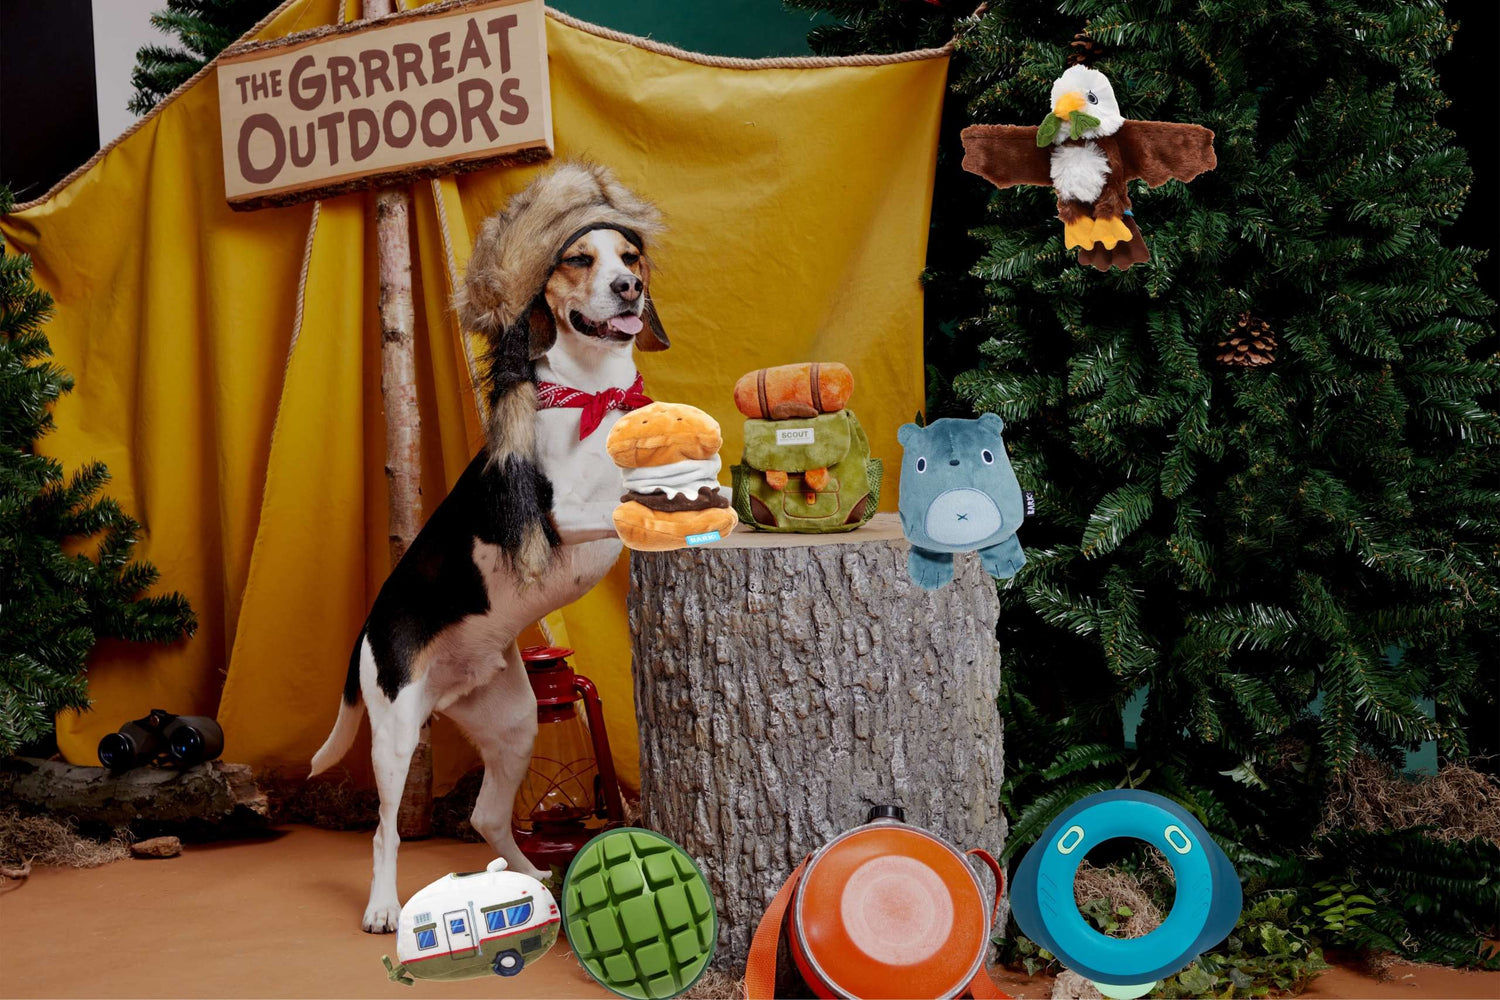 Get Your Dog Ready For Camp With Our "Grrreat Outdoor" Collection at Tractor Supply Company